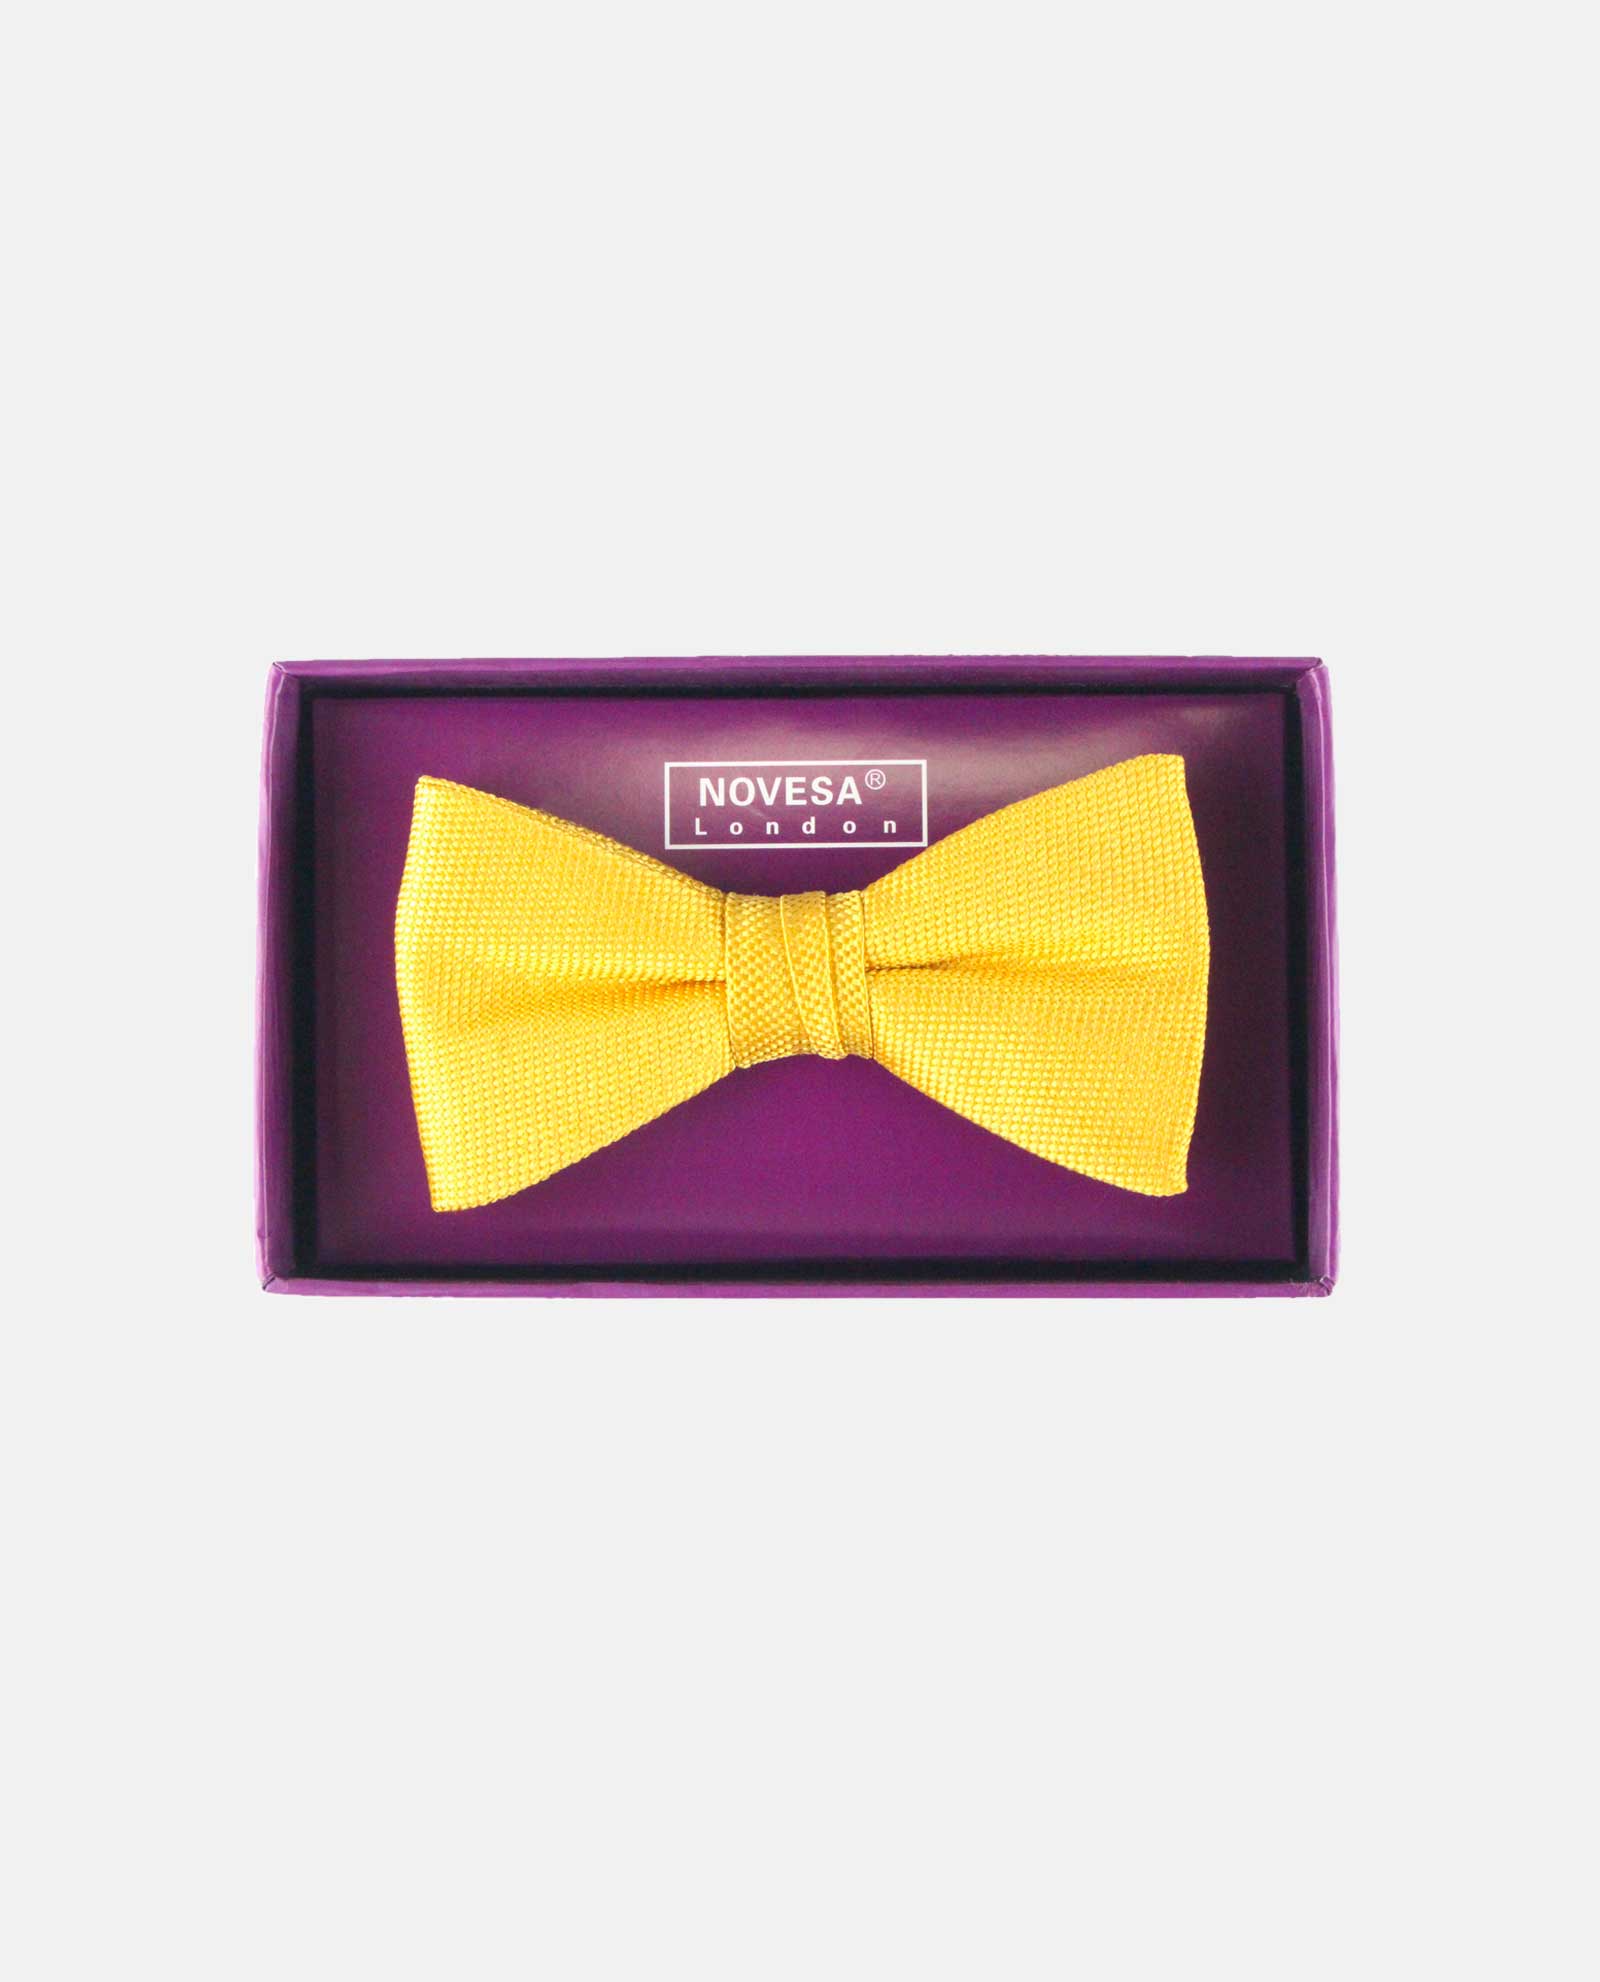 Yellow Knit Ready-Tie Bow